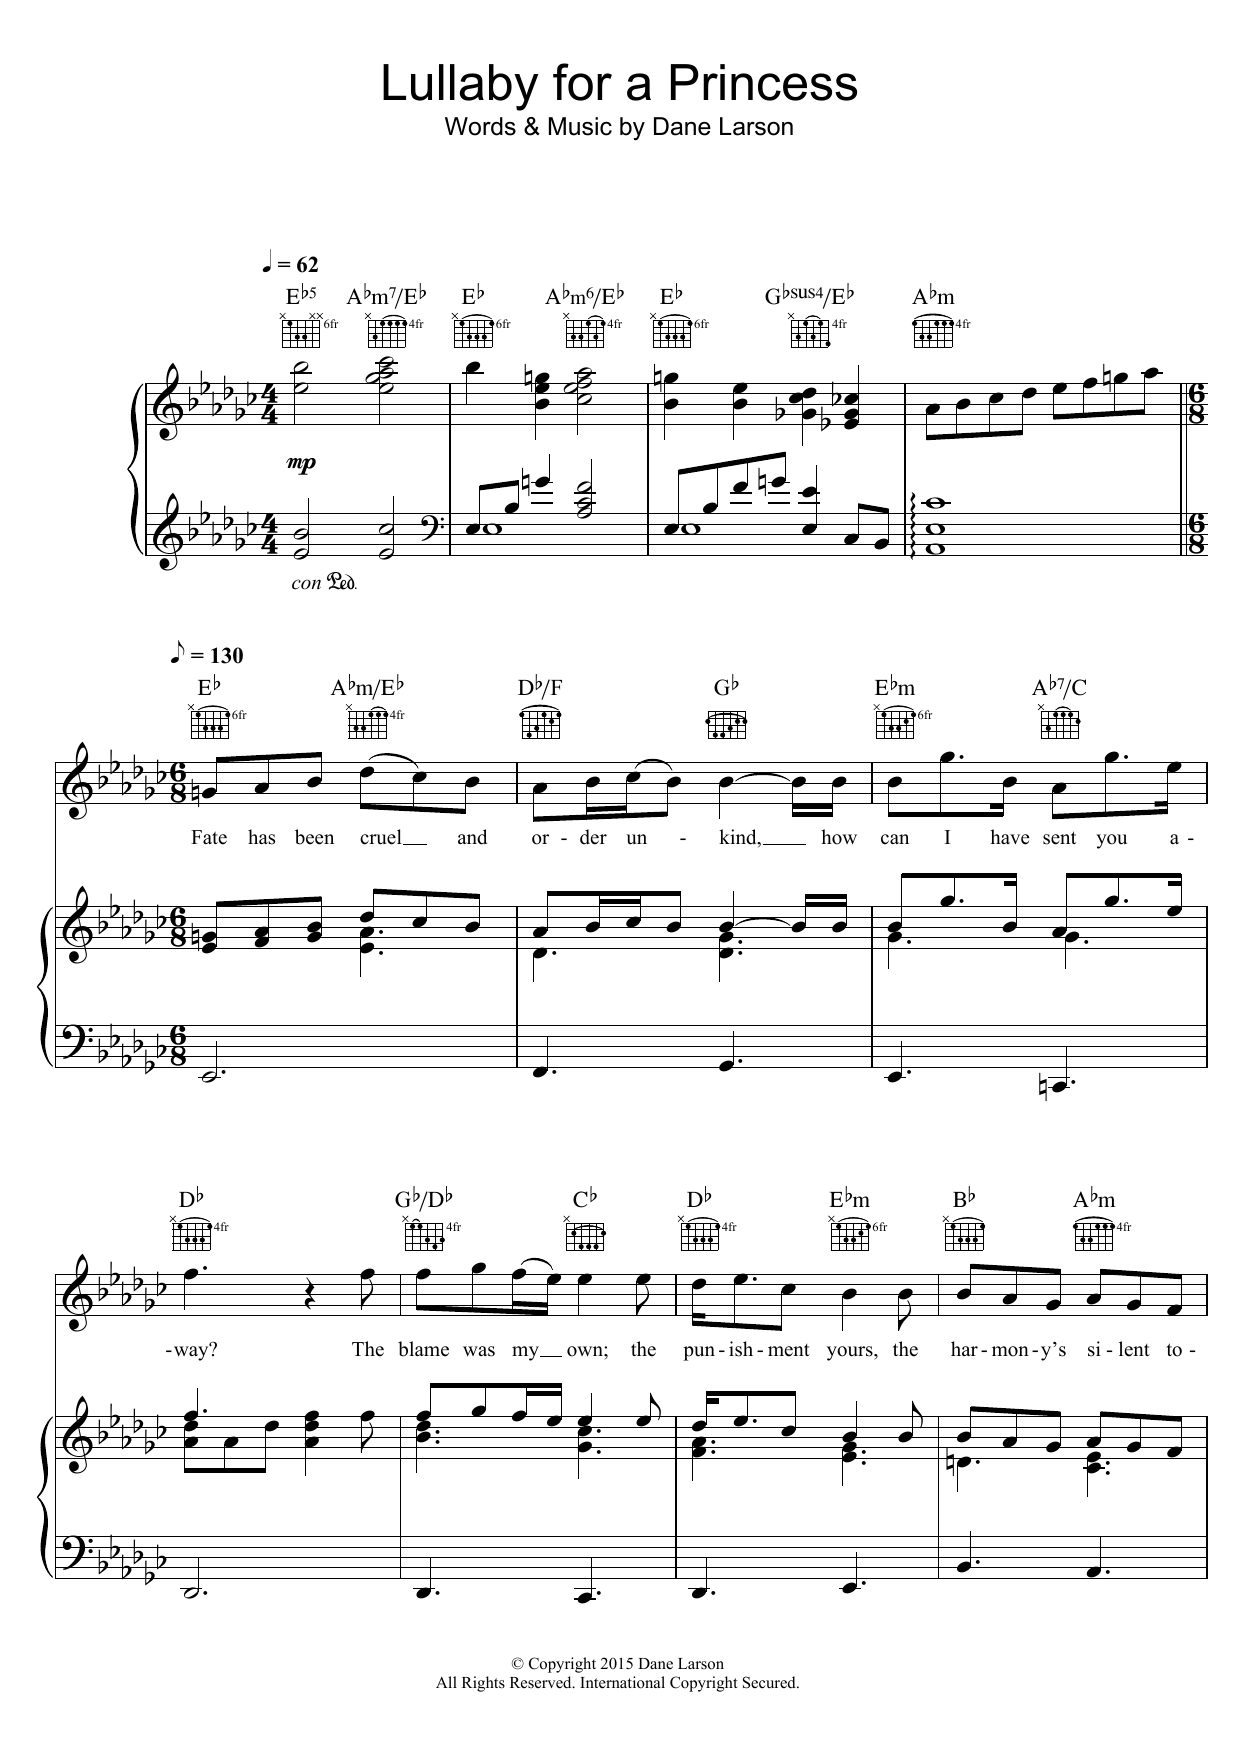 Download Ponyphonic Lullaby For A Princess Sheet Music